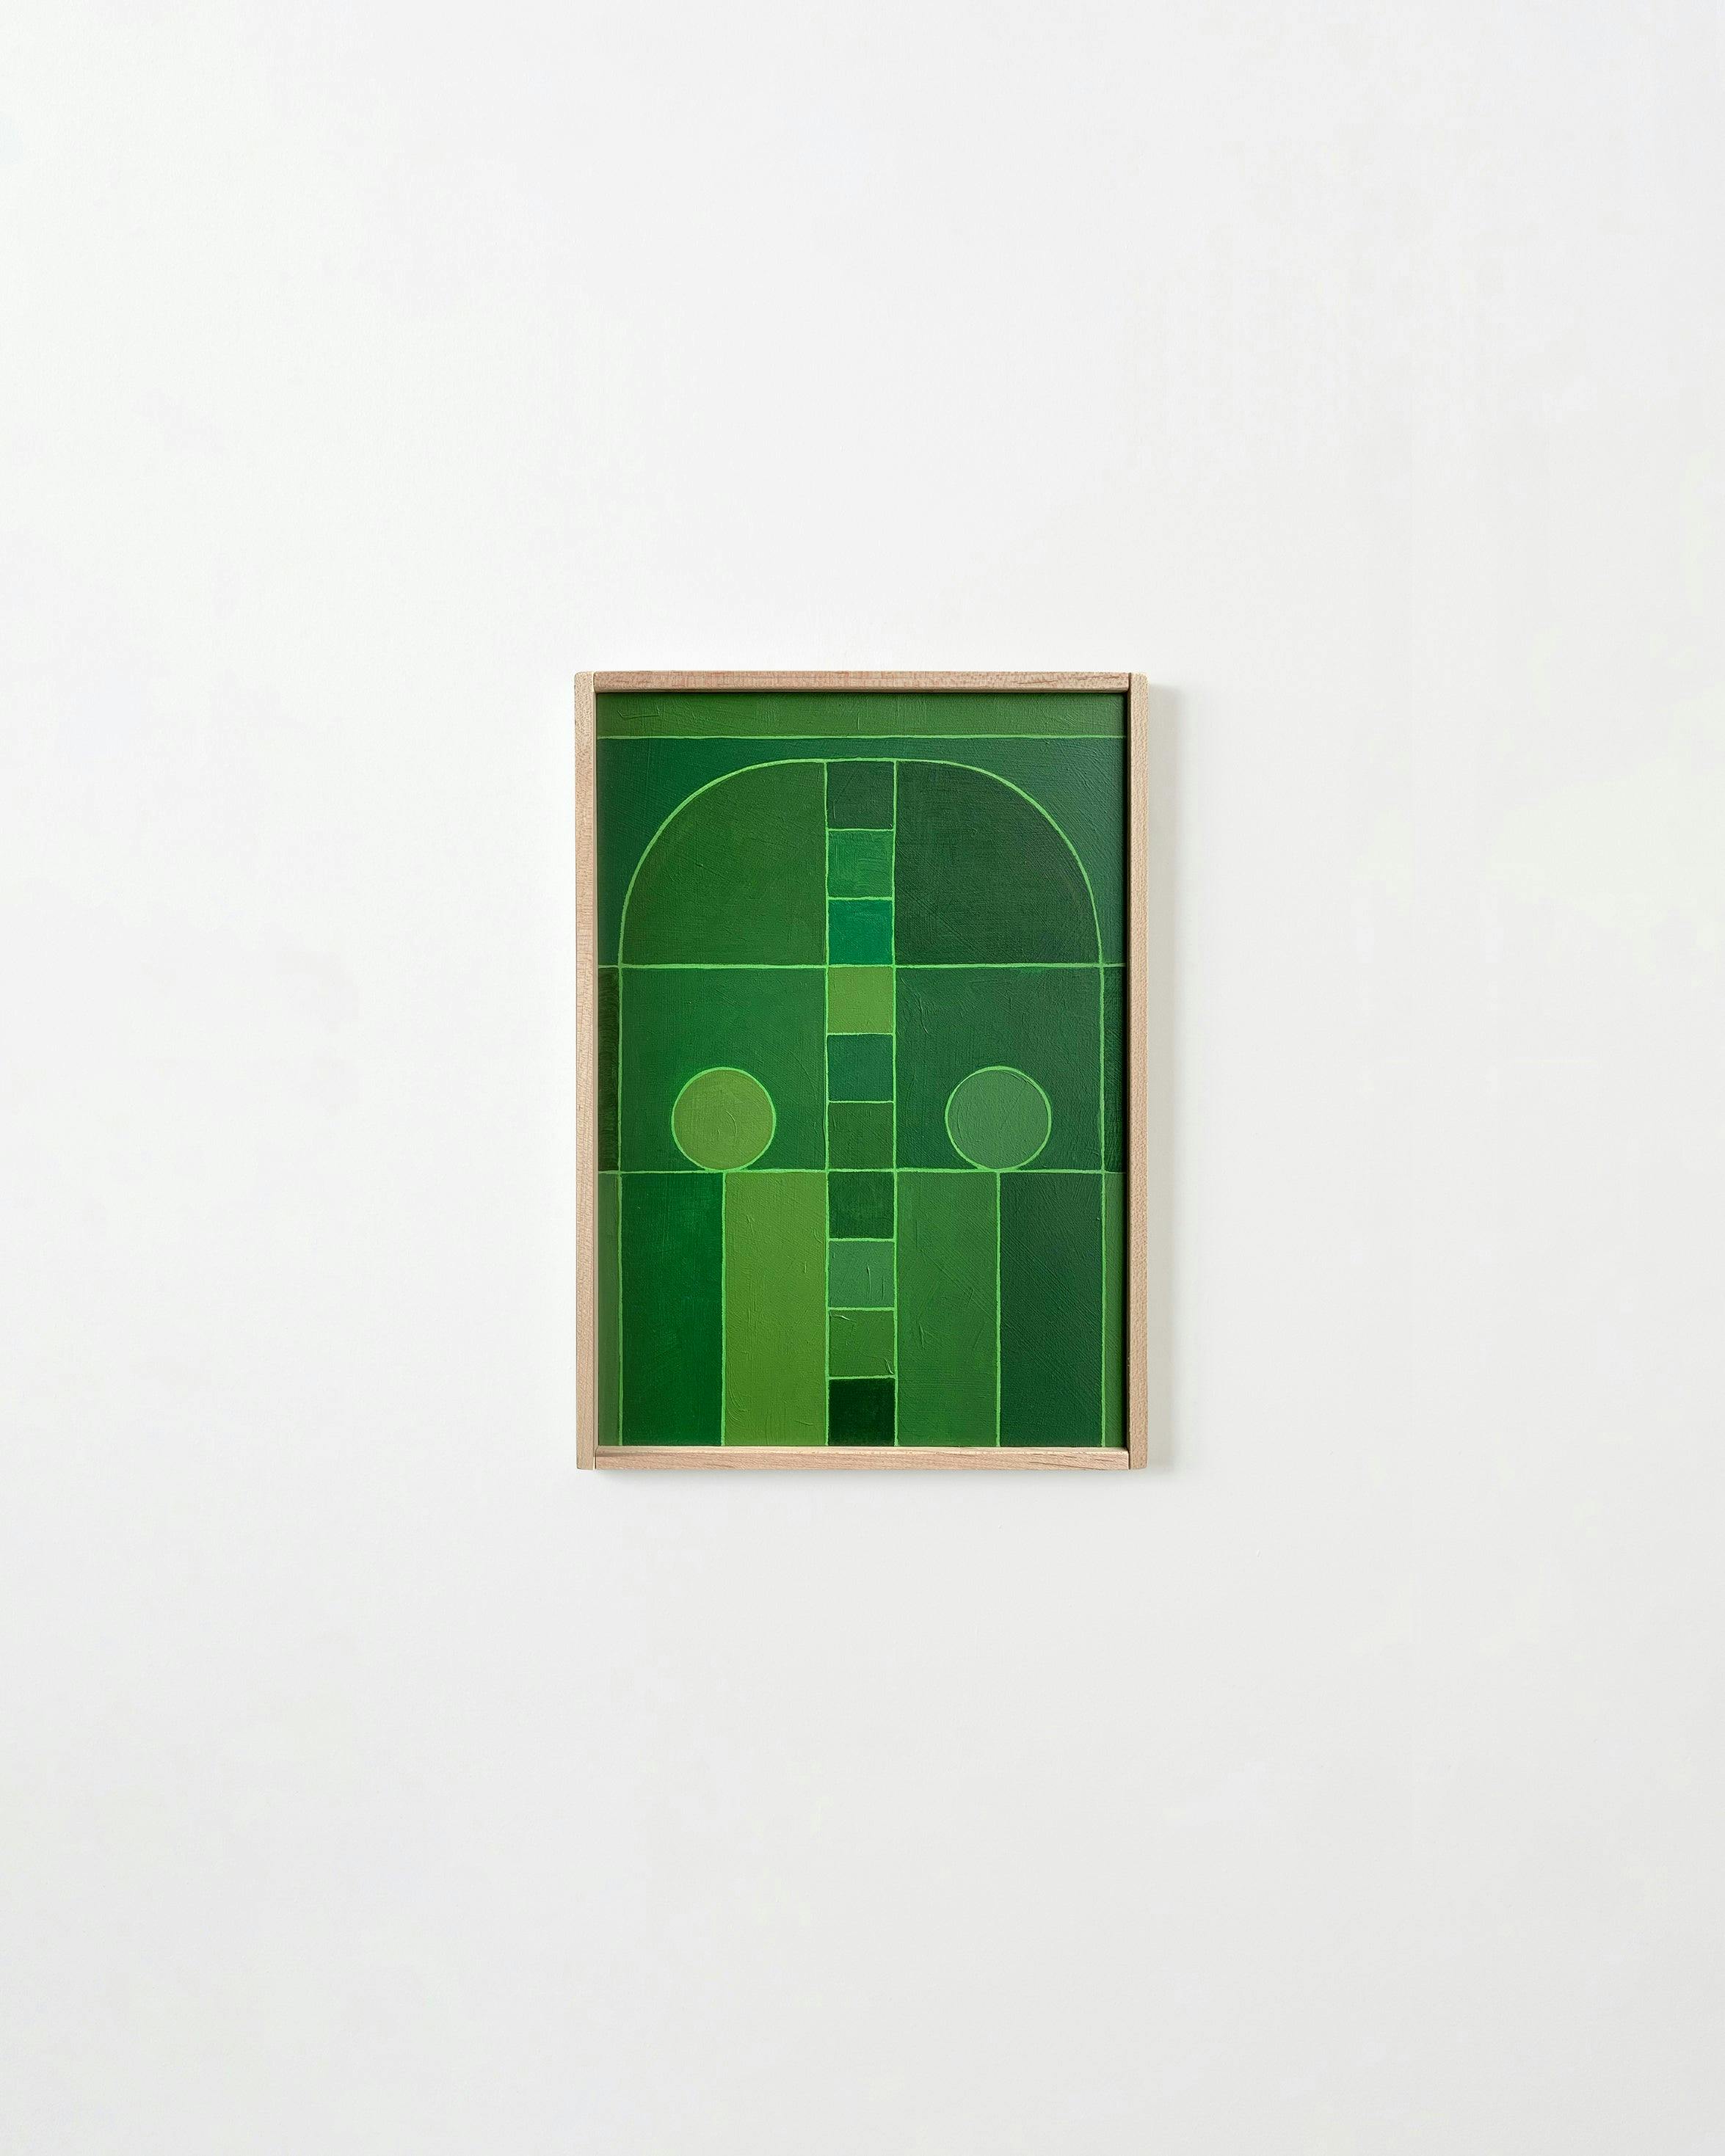 Painting by Carla Weeks titled "Stained Glass Study in Green 6".